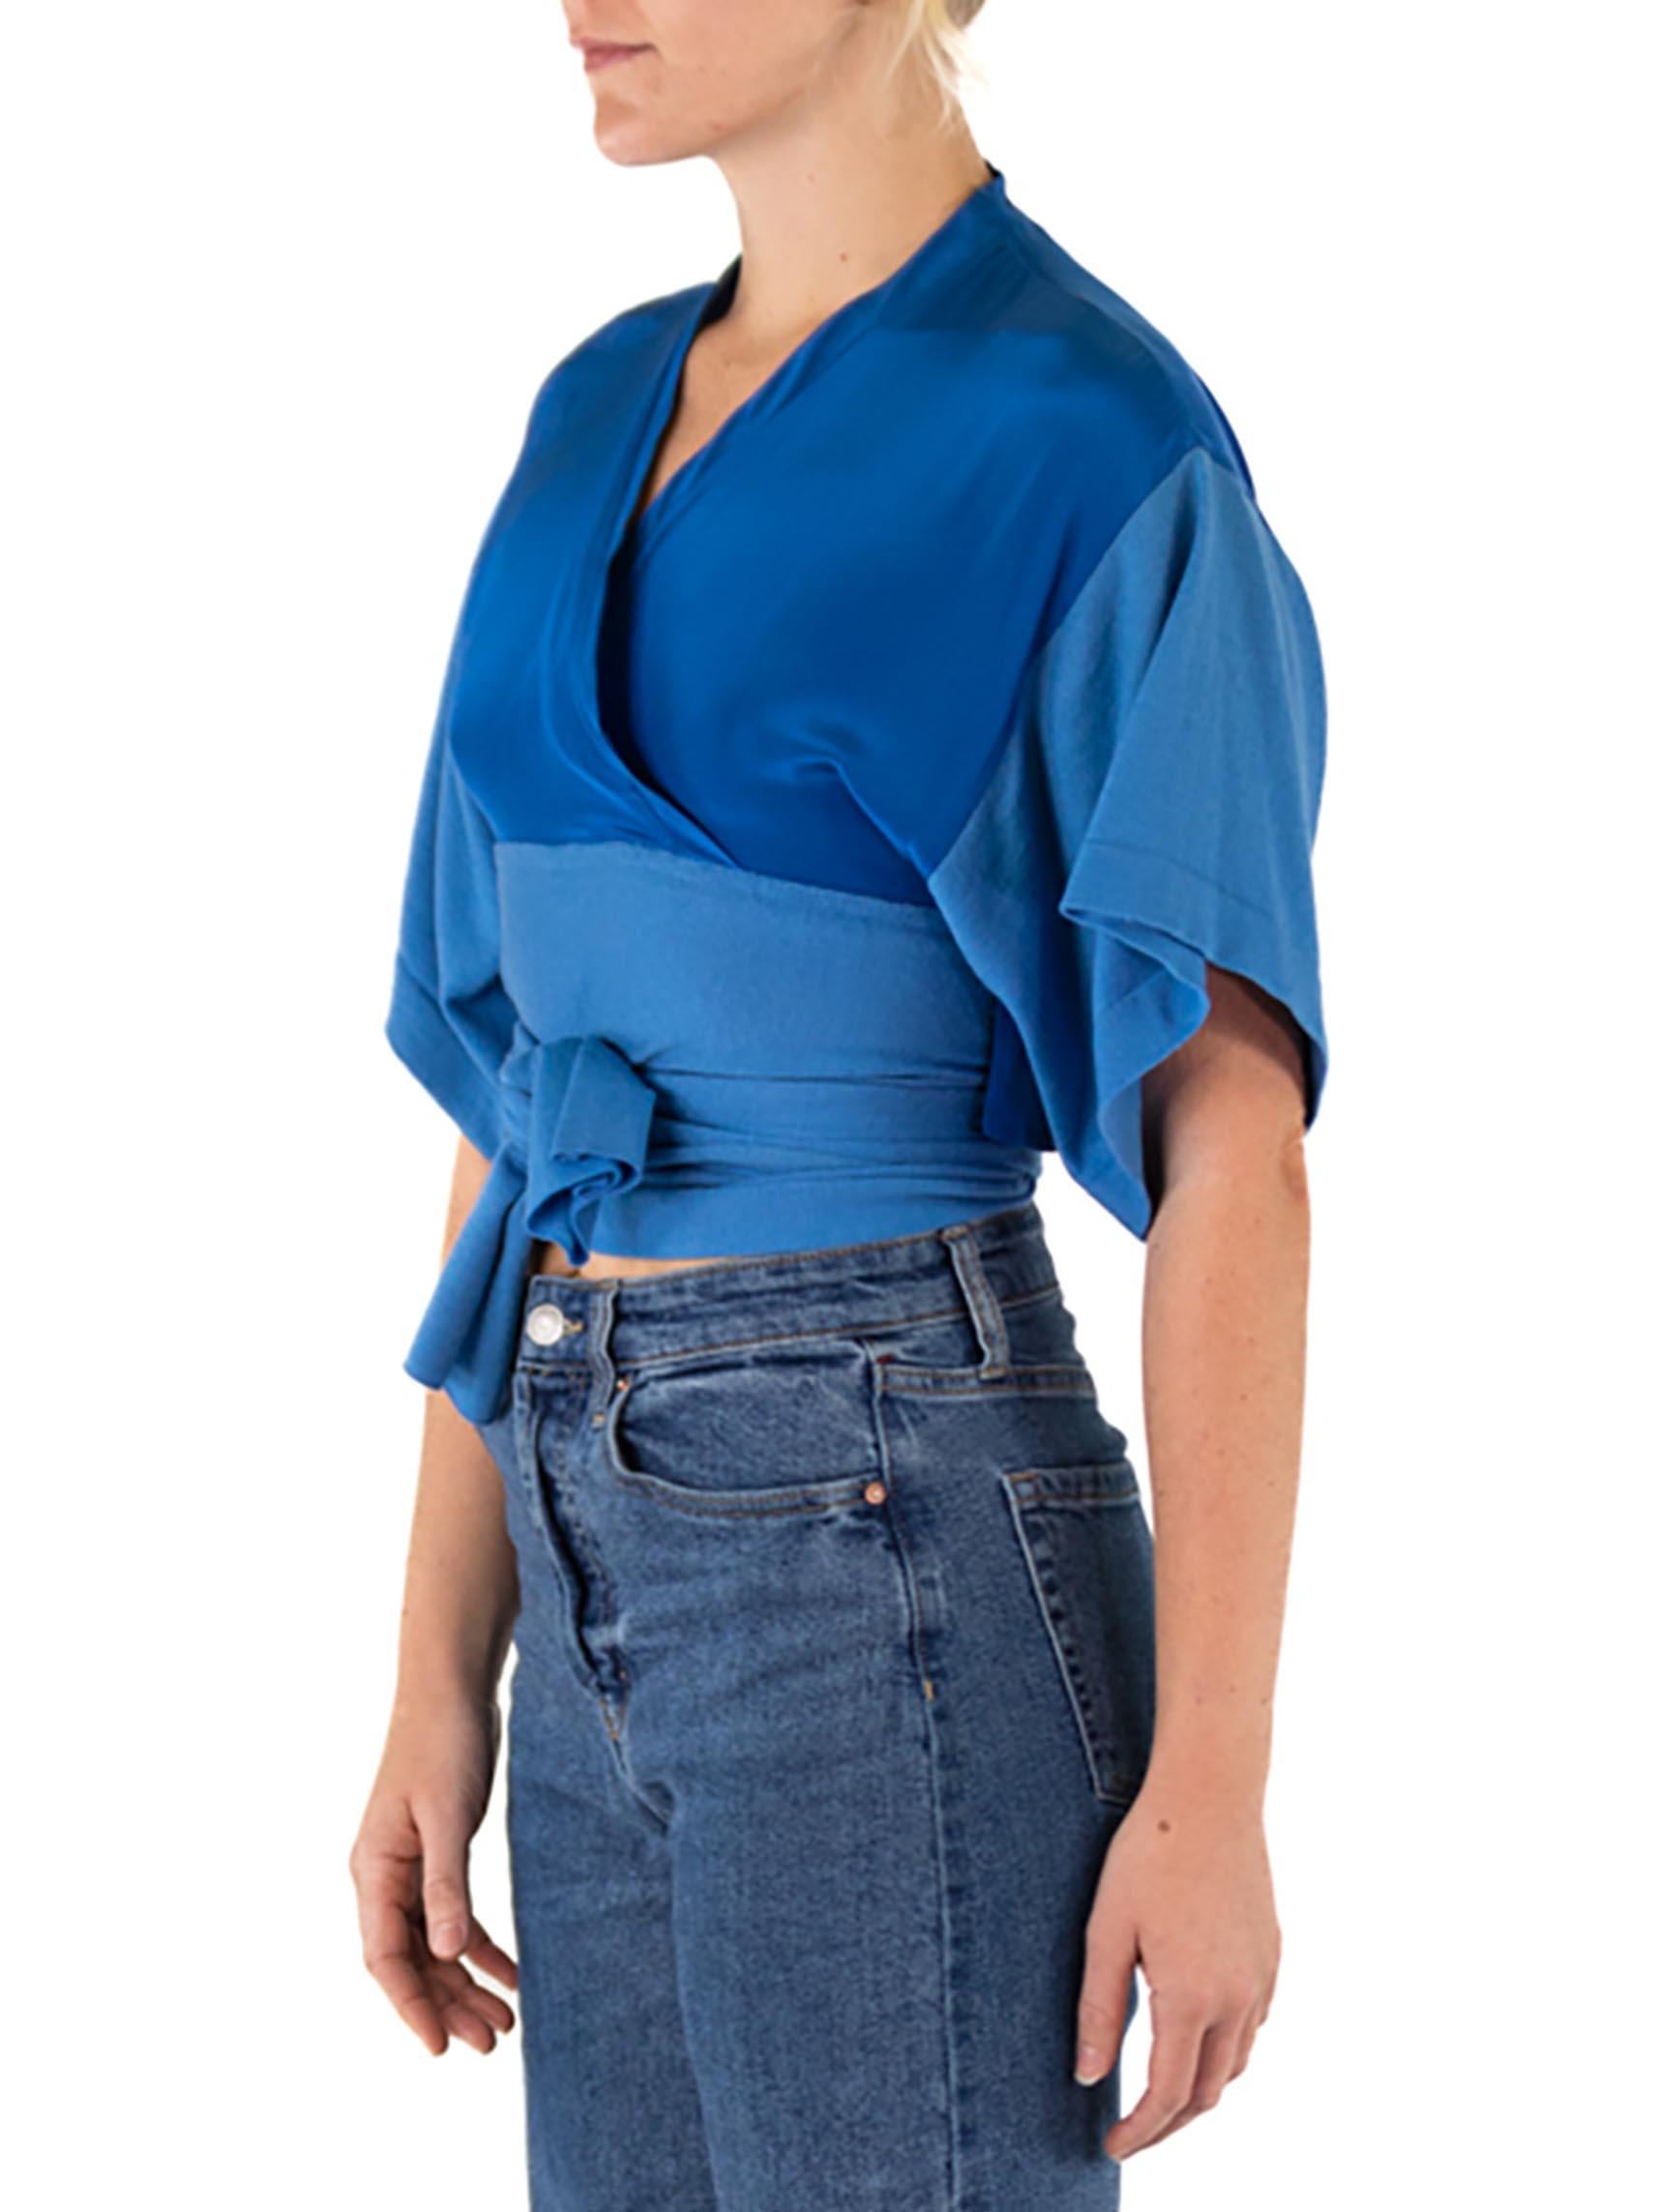 1980S GIANFRANCO FERRE Powdered Blue Silk Blouse For Sale 2